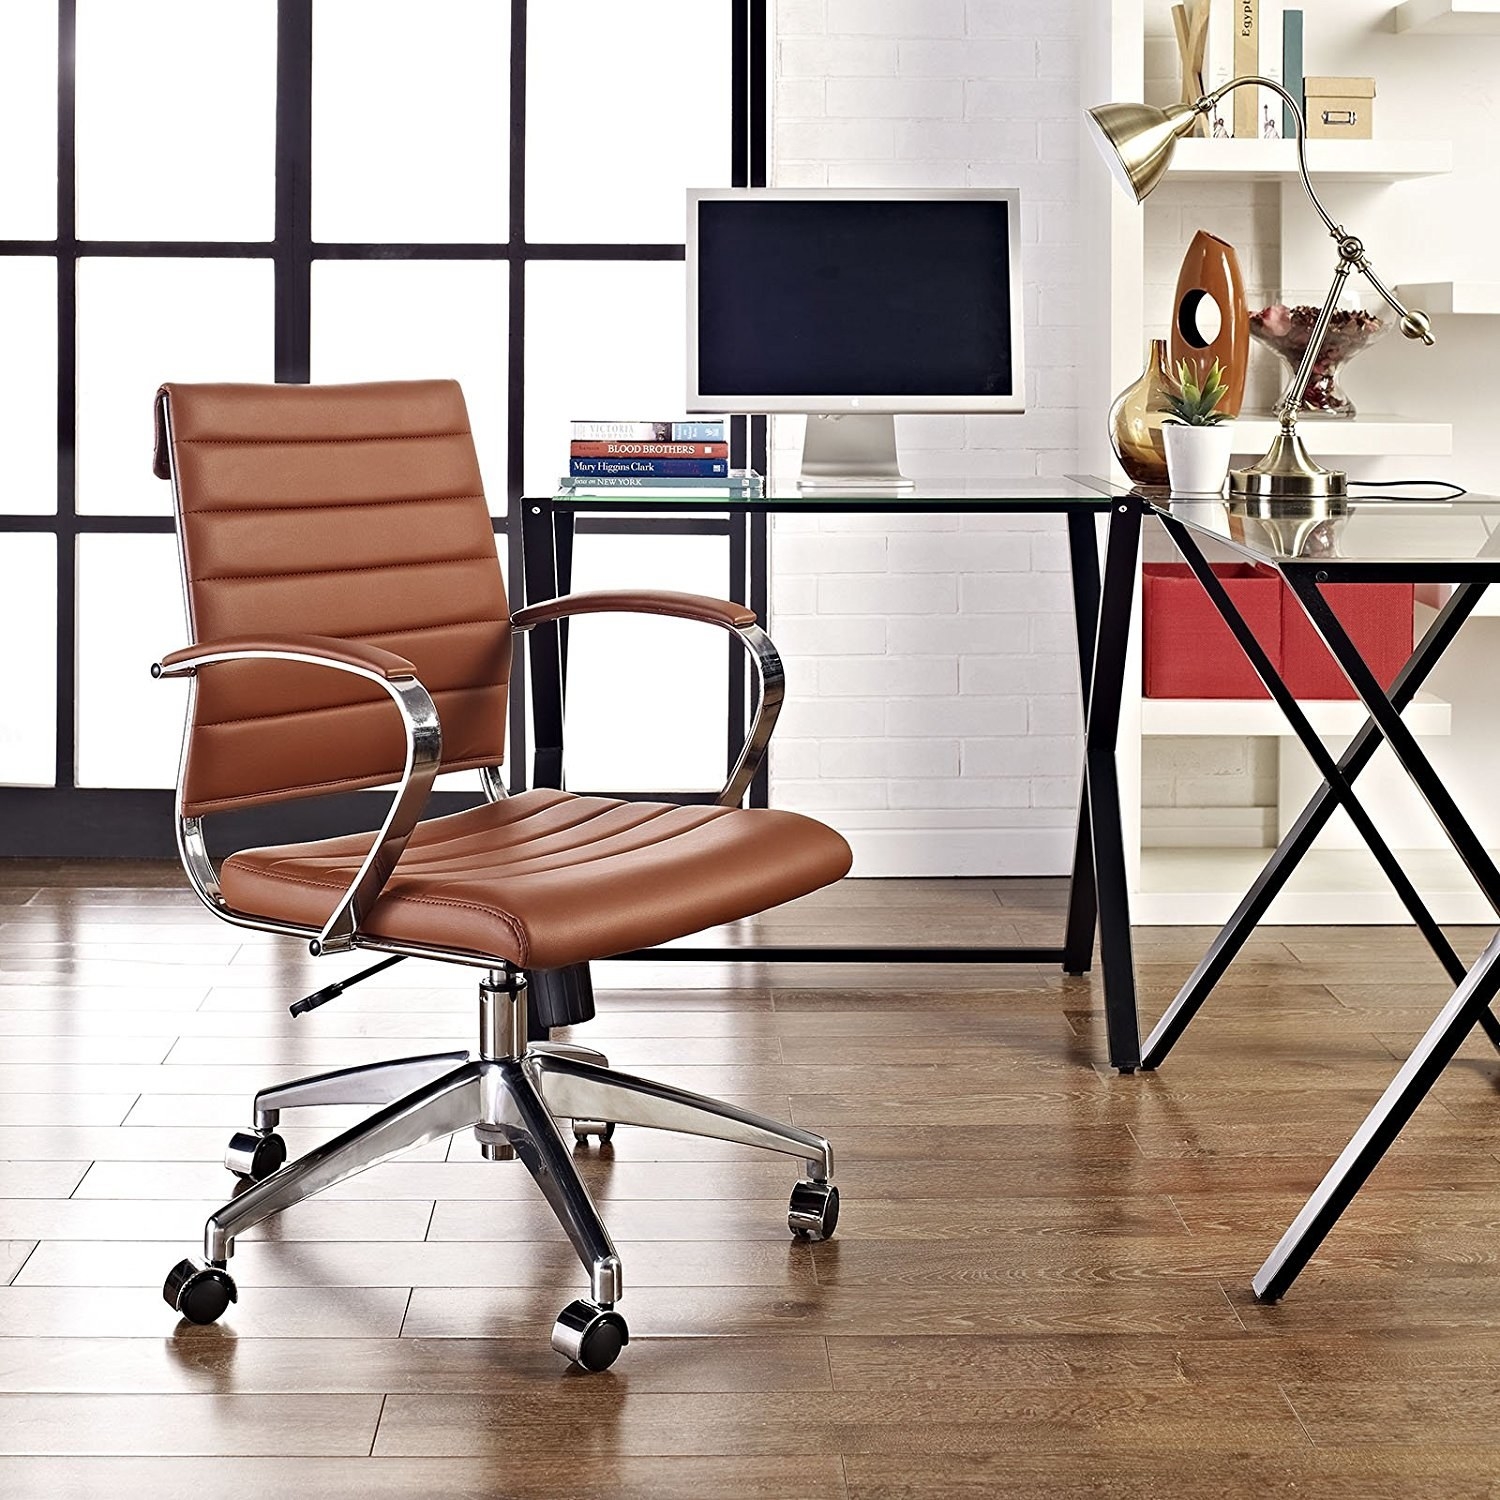 19 Of The Best Desk Chairs You Can Get On Amazon